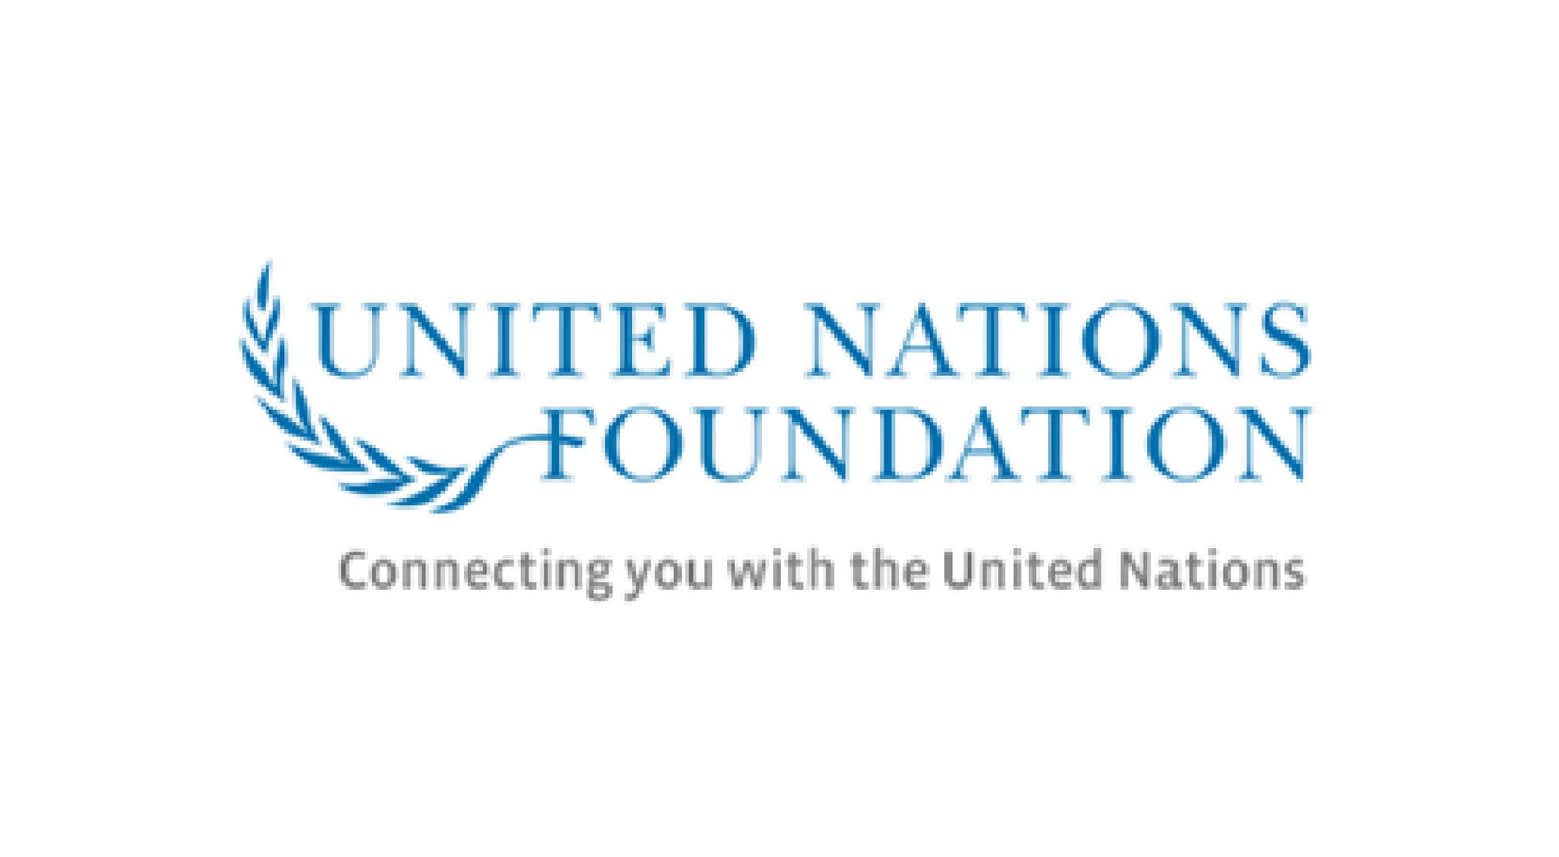 United Nations Foundation. Connecting you with the United Nations logo.